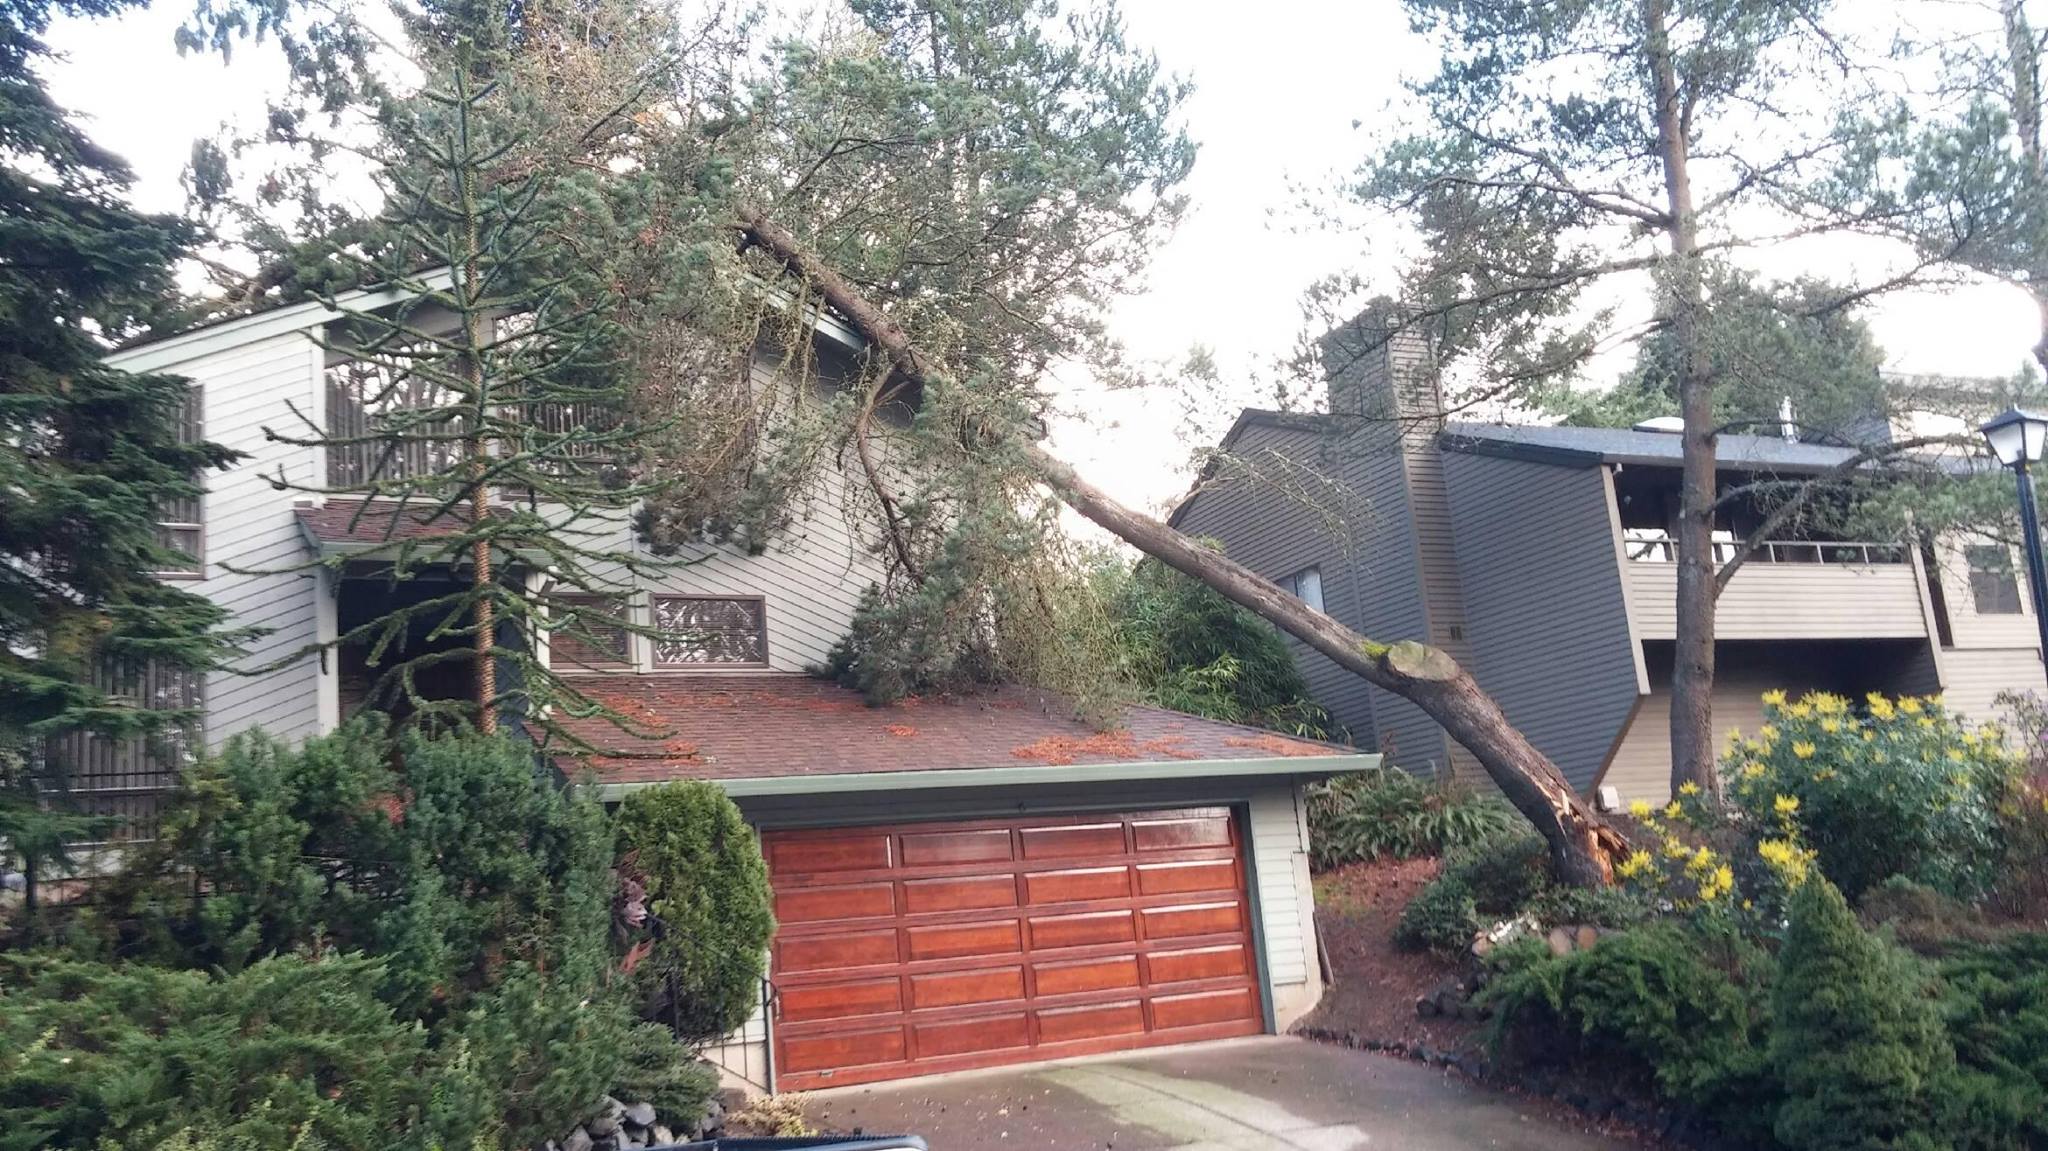 Home With Damage from a Fallen Tree During Storm